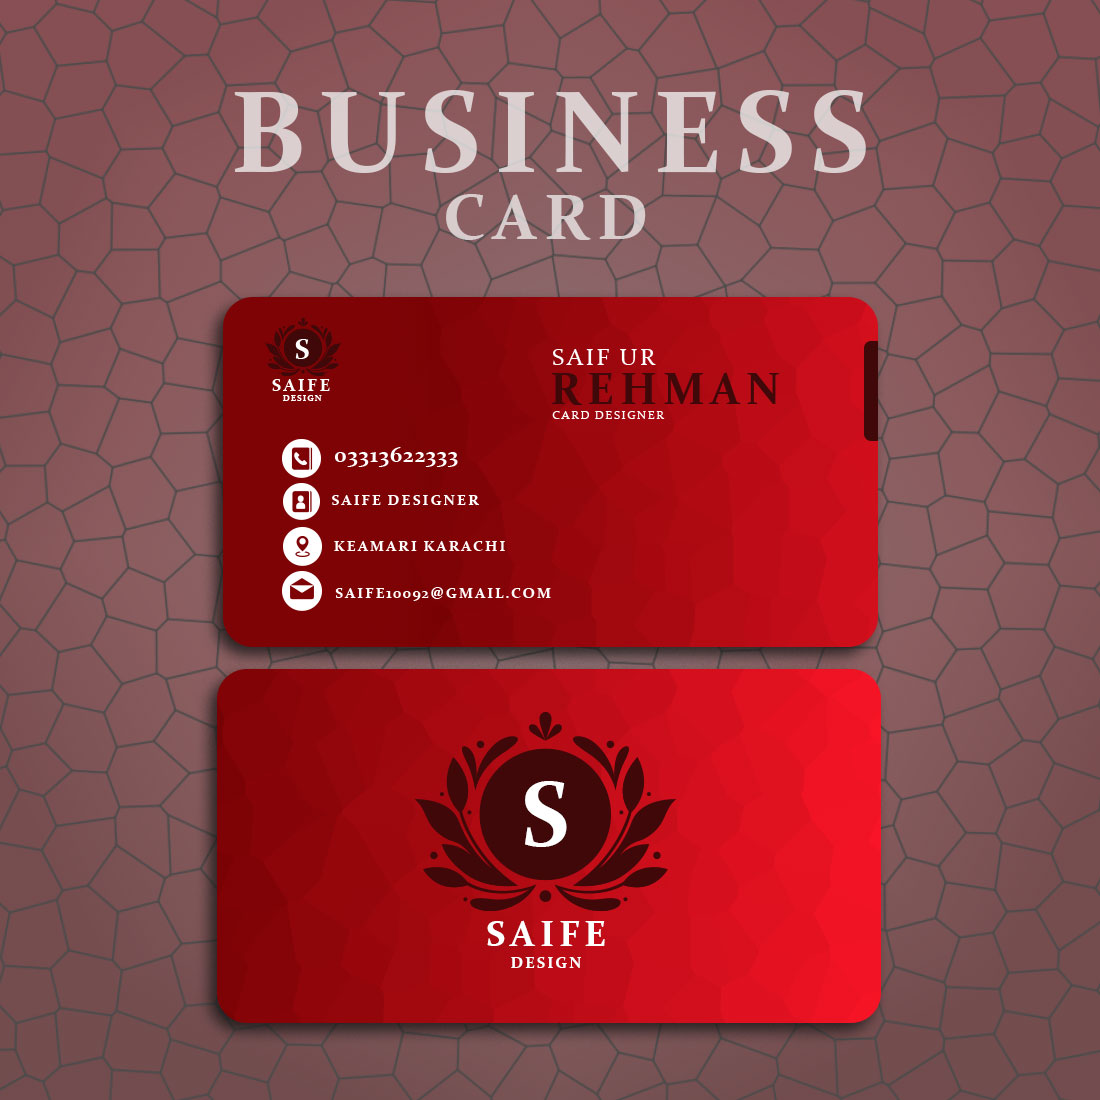 BUSINESS CARD cover image.